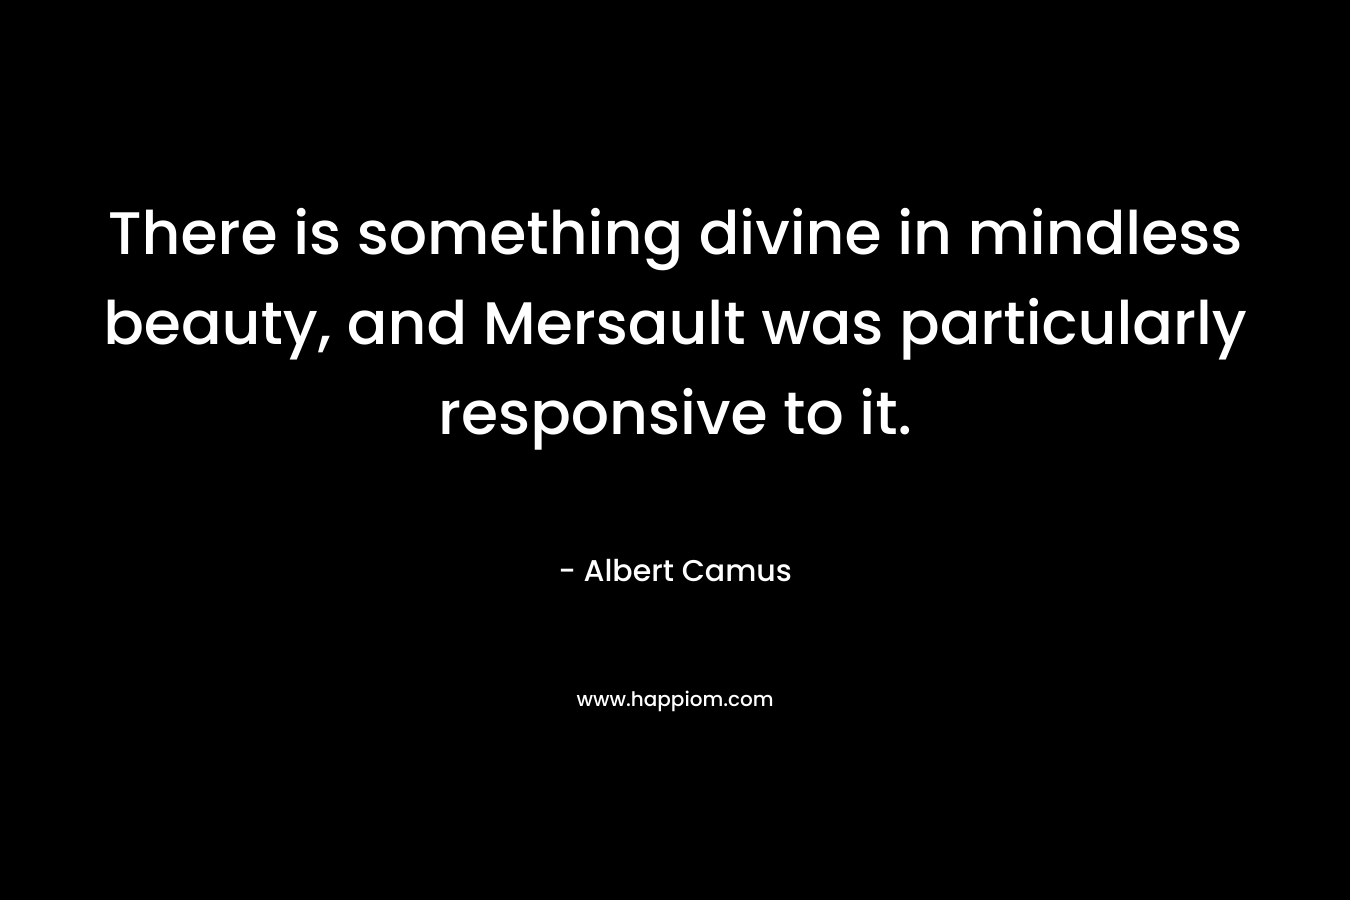 There is something divine in mindless beauty, and Mersault was particularly responsive to it.